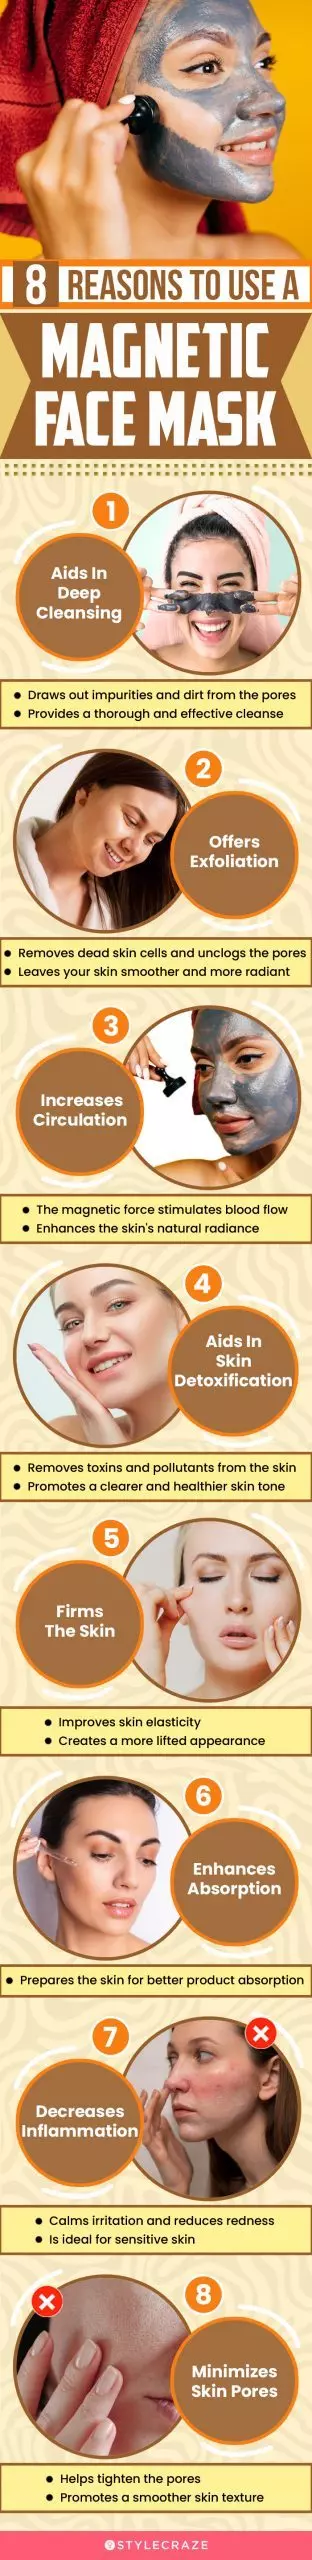 8 Reasons To Use A Magnetic Face Mask(infographic)